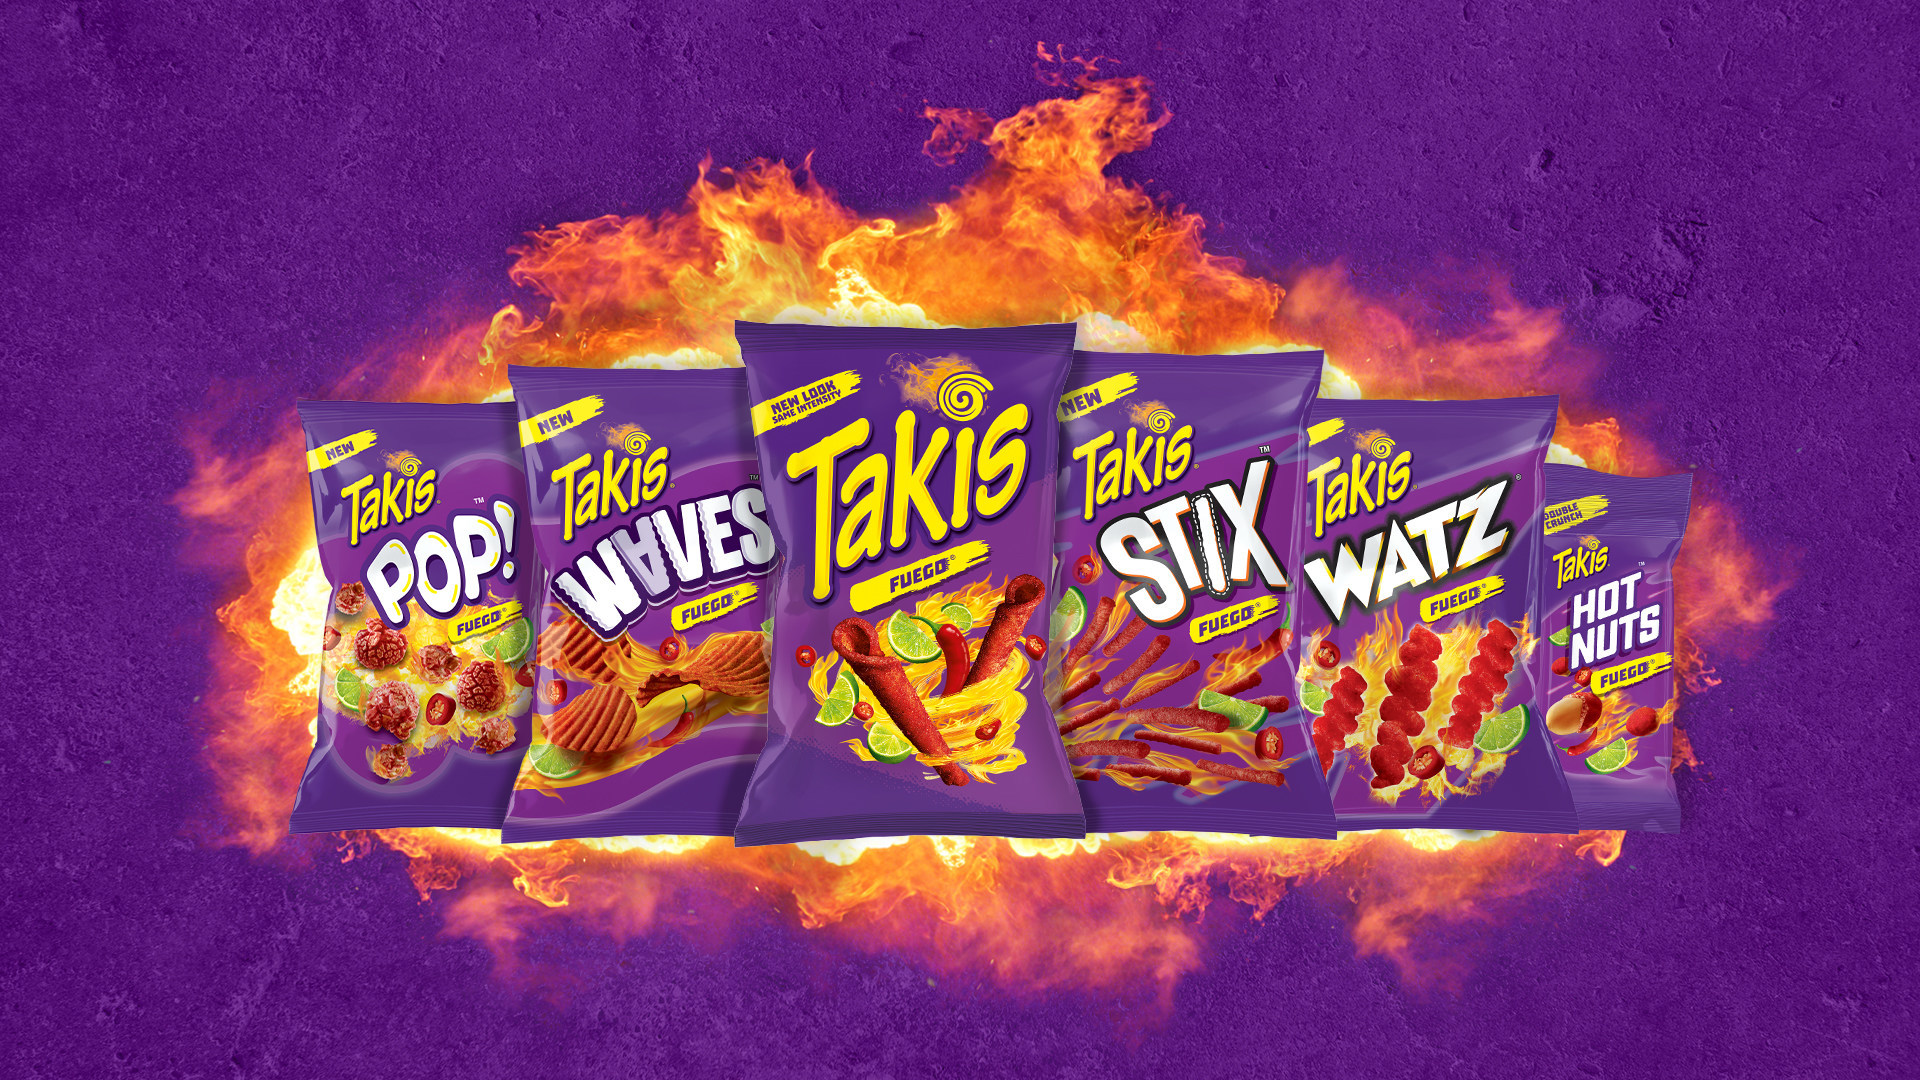 Bigger Logo Featured in Redesign of Takis Snack Brand